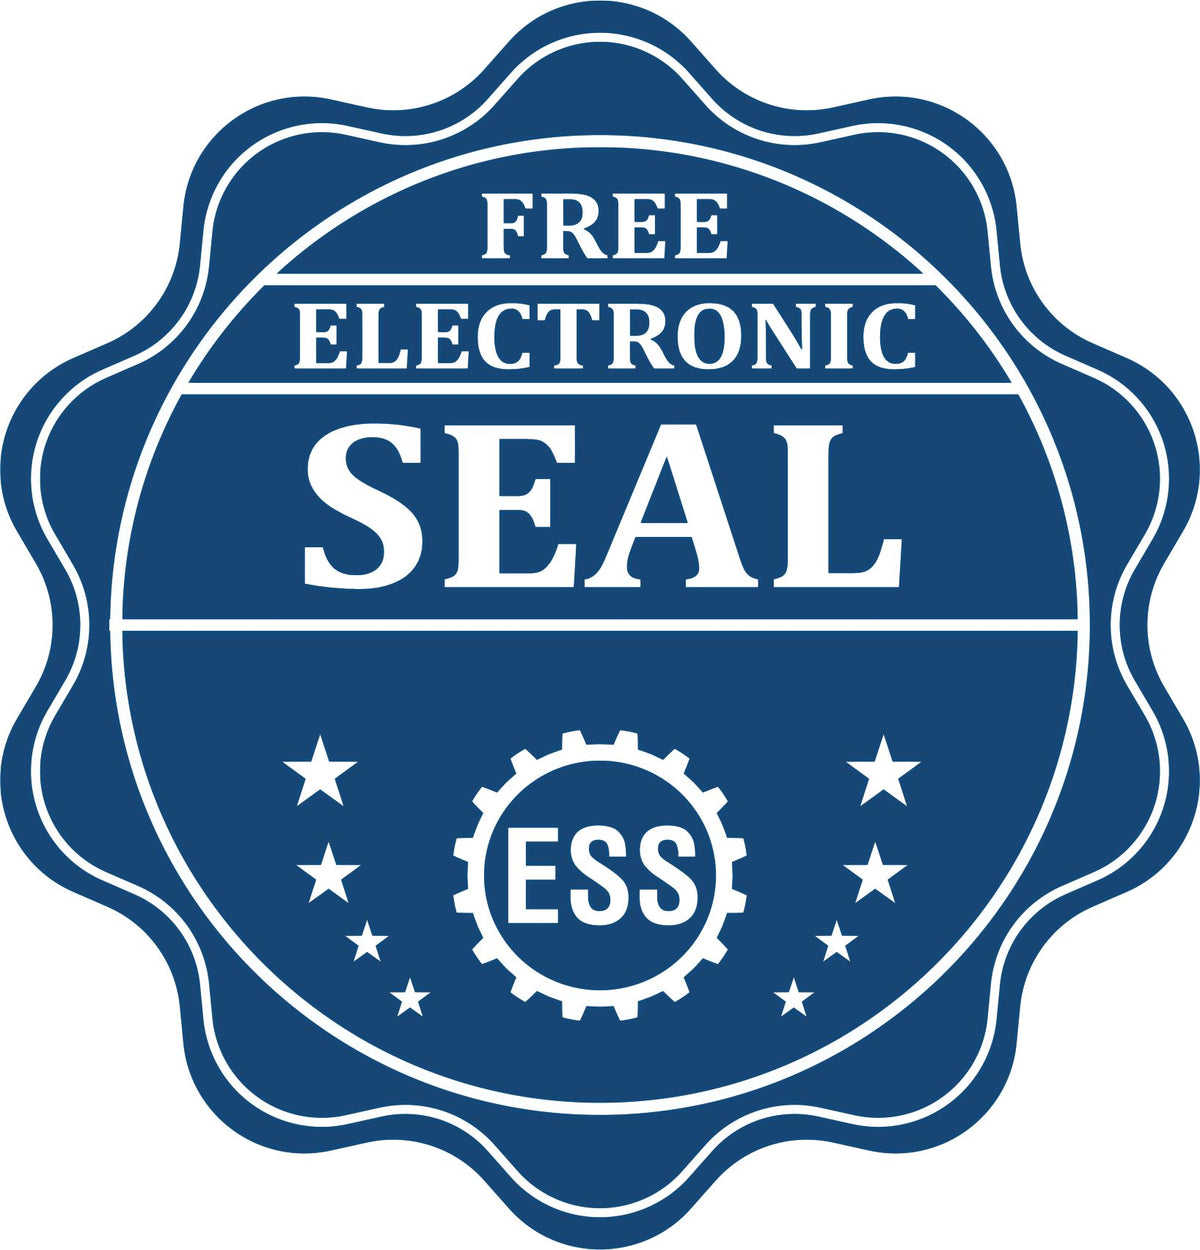 A badge showing a free electronic seal for the Handheld Wyoming Professional Engineer Embosser with stars and the ESS gear on the emblem.